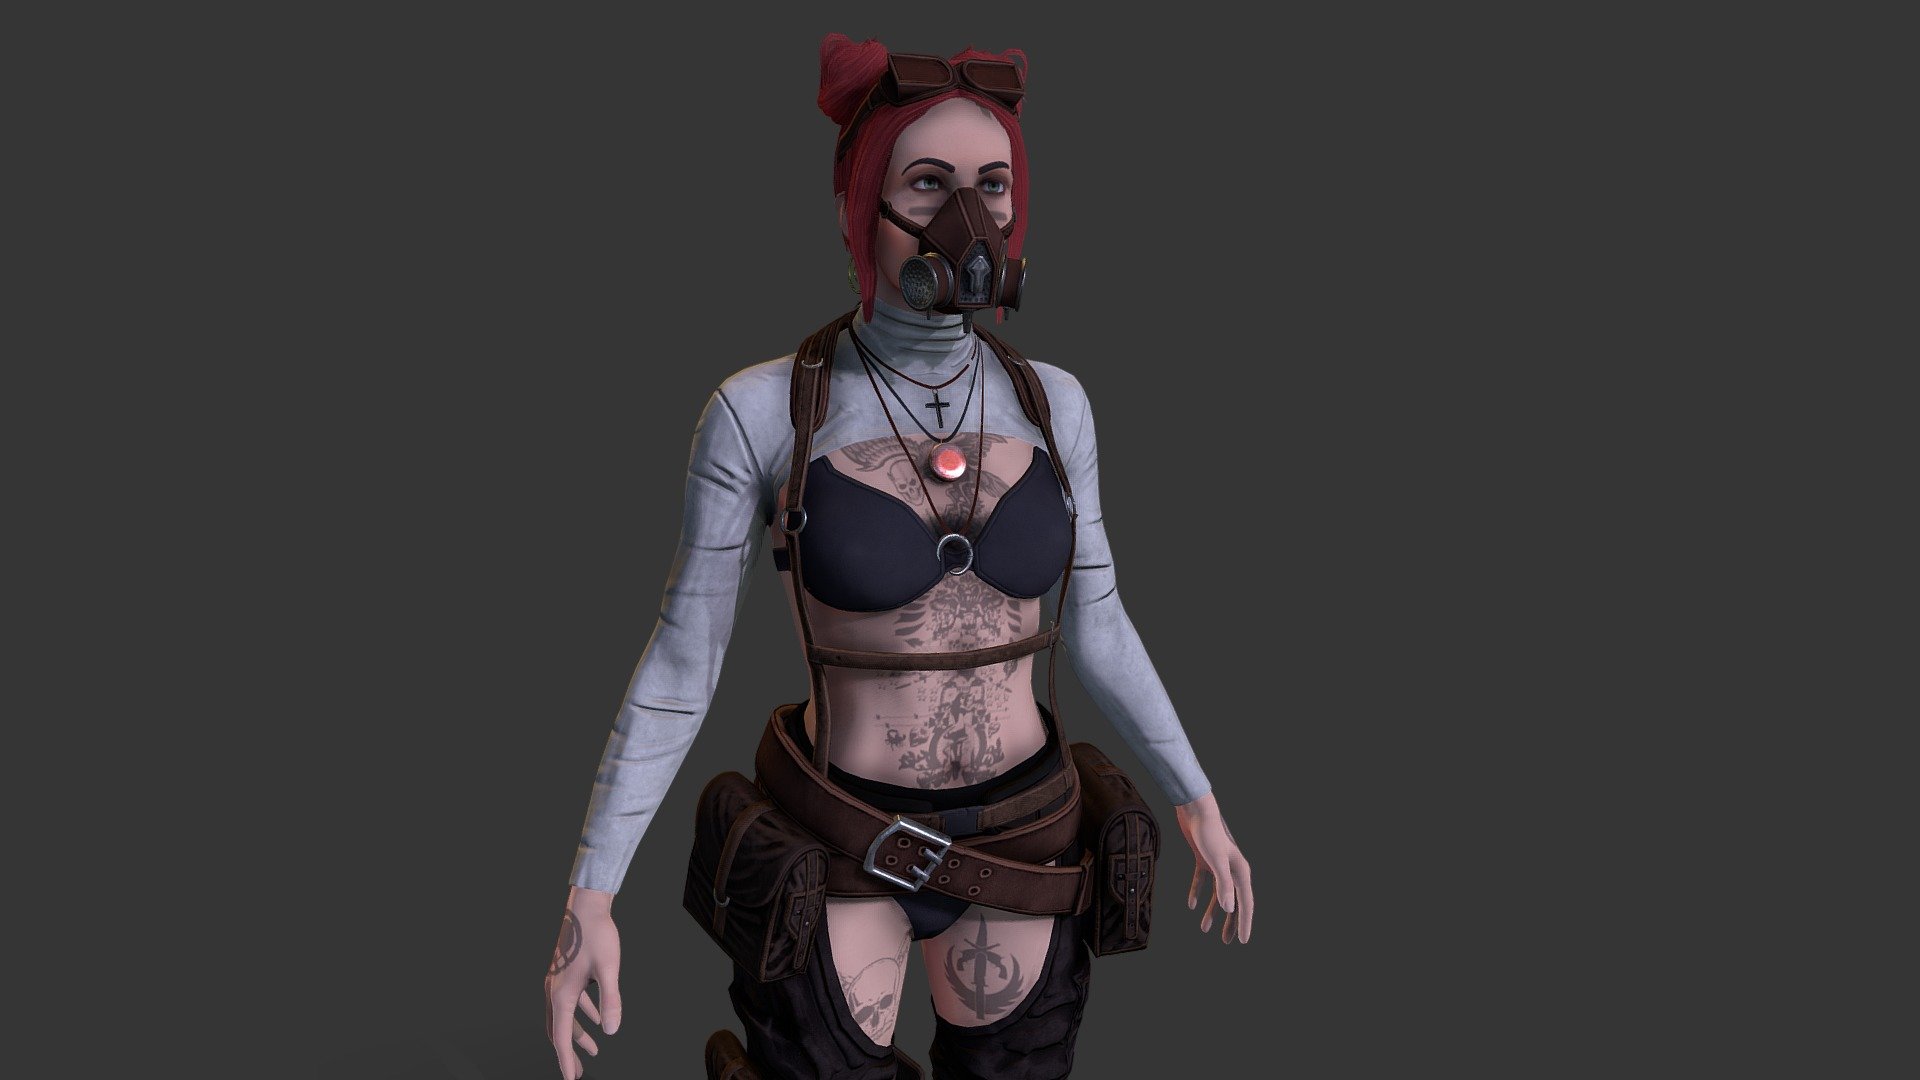 Wasteland girl 3d model, pbr textures, game-ready and low poly - Wasteland Girl - 3D model by kir_the_great 3d model